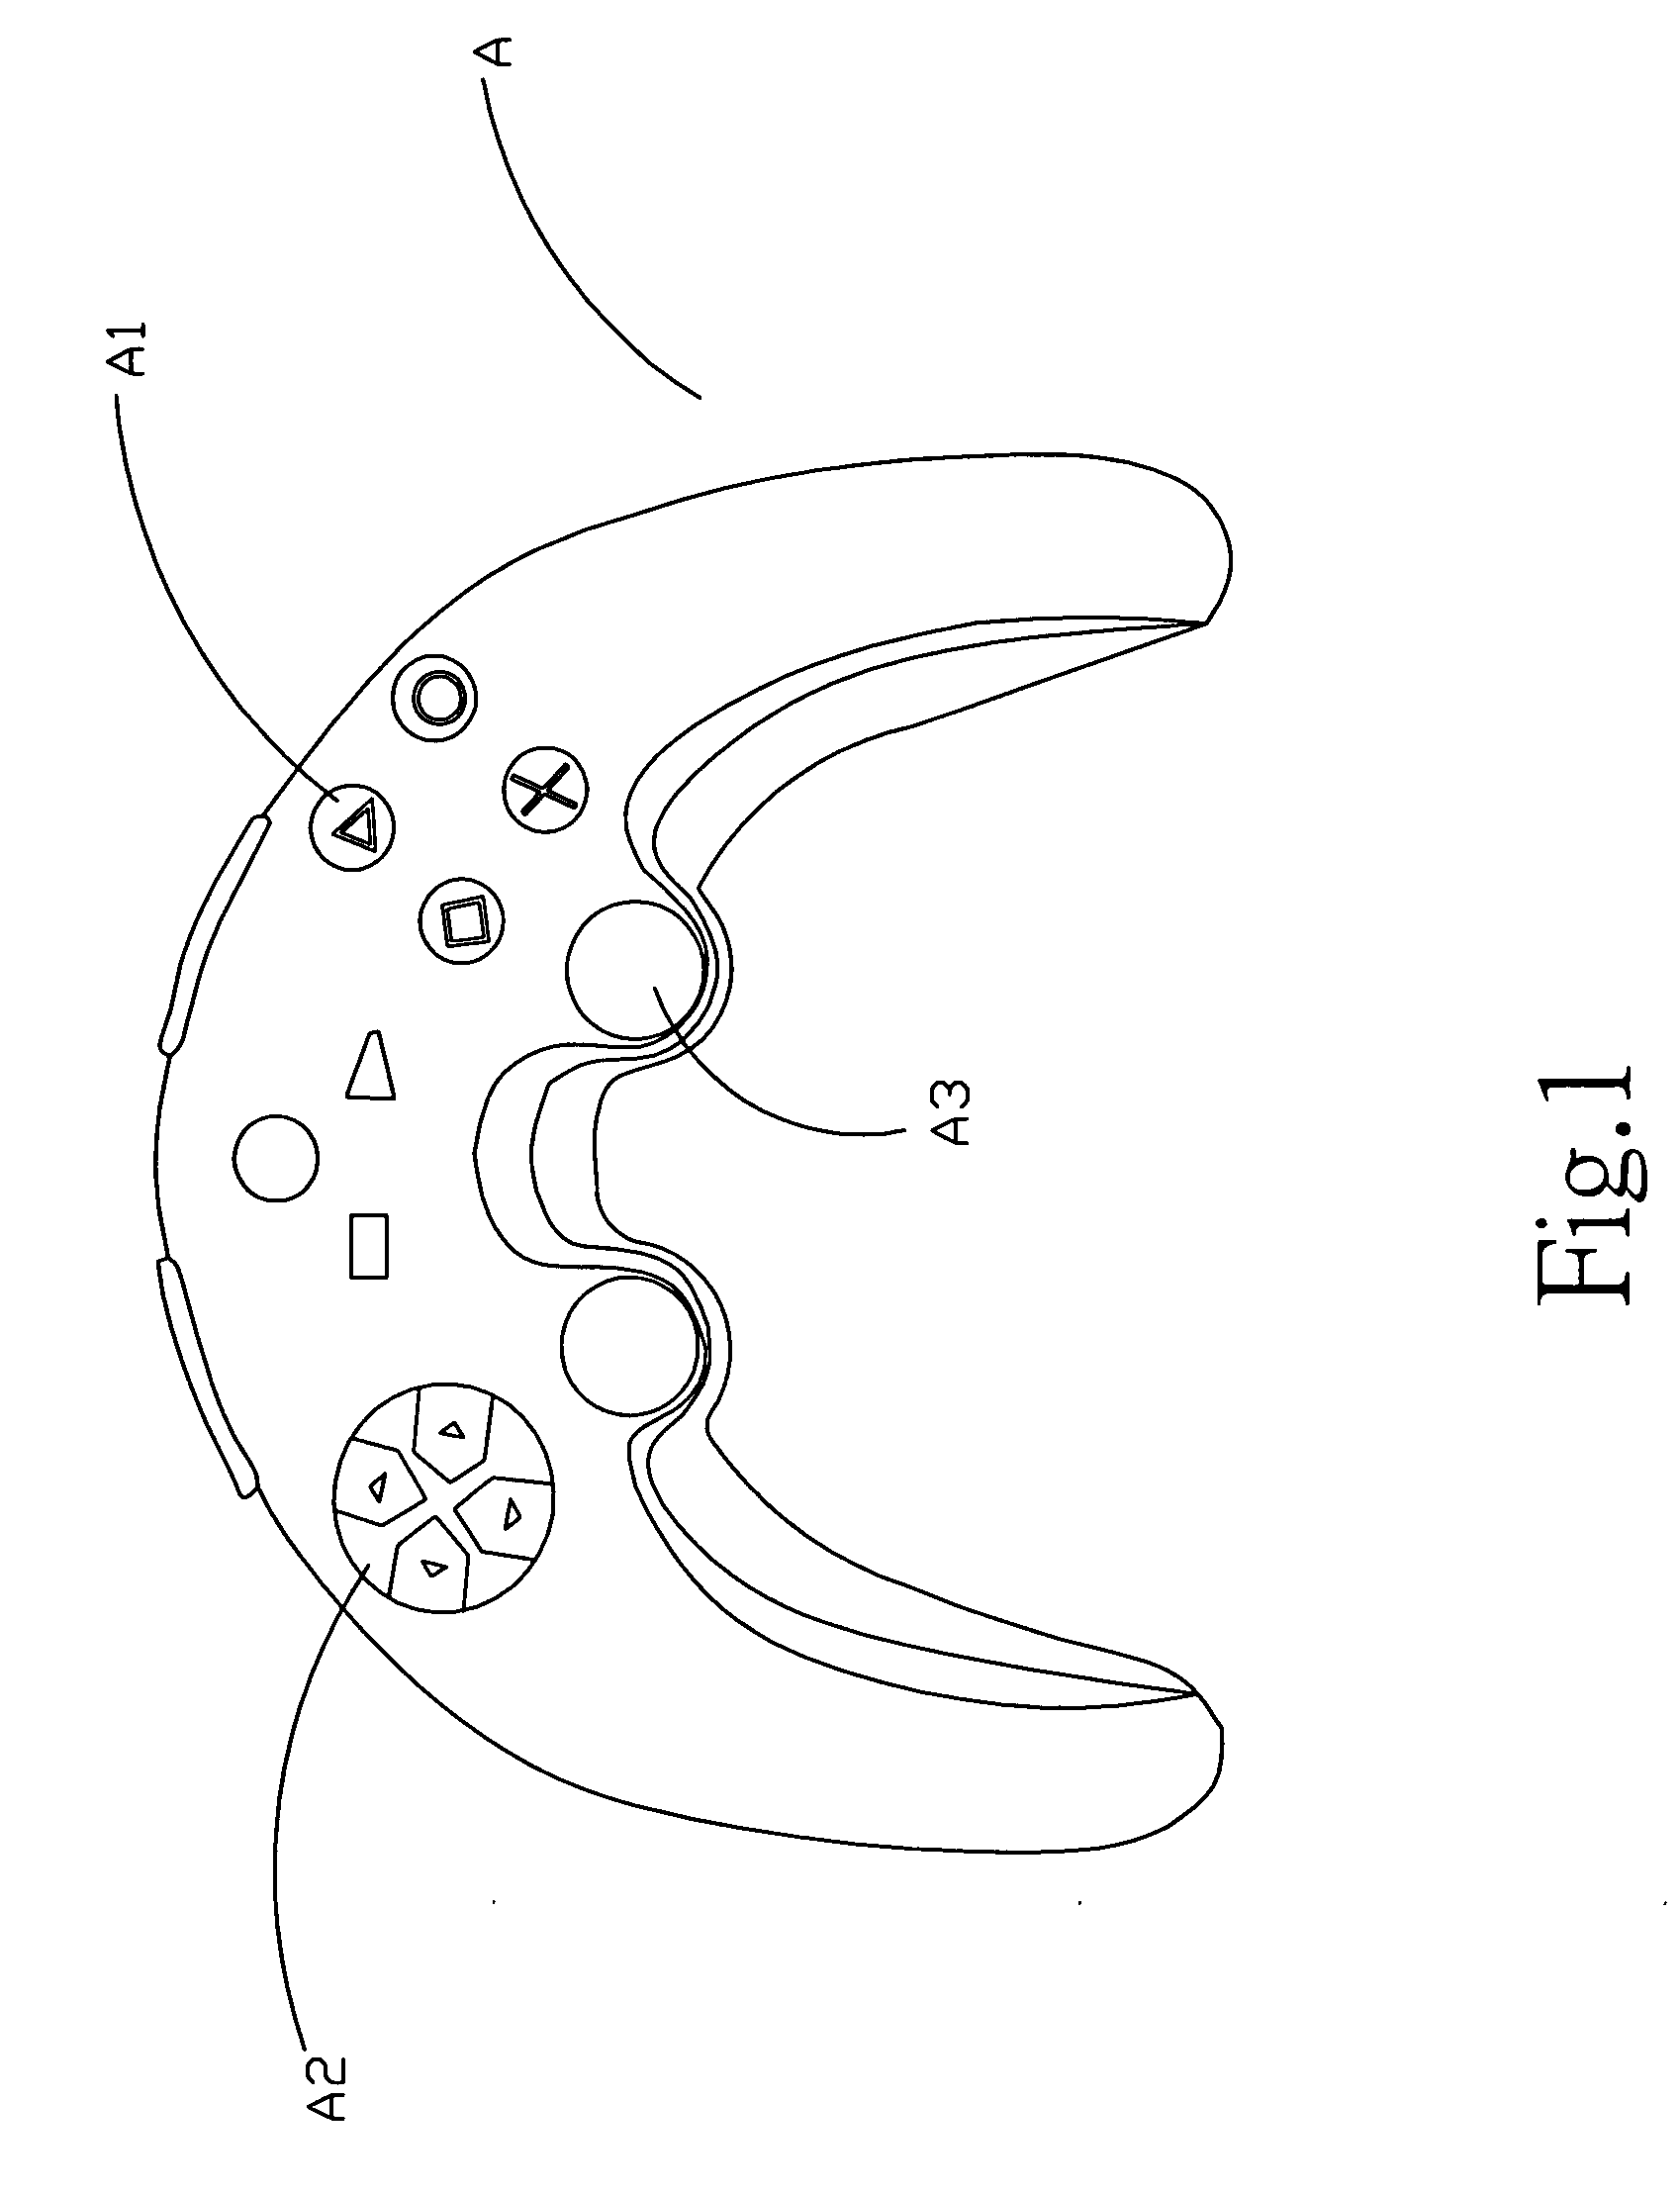 Control arrangement for operating video game console